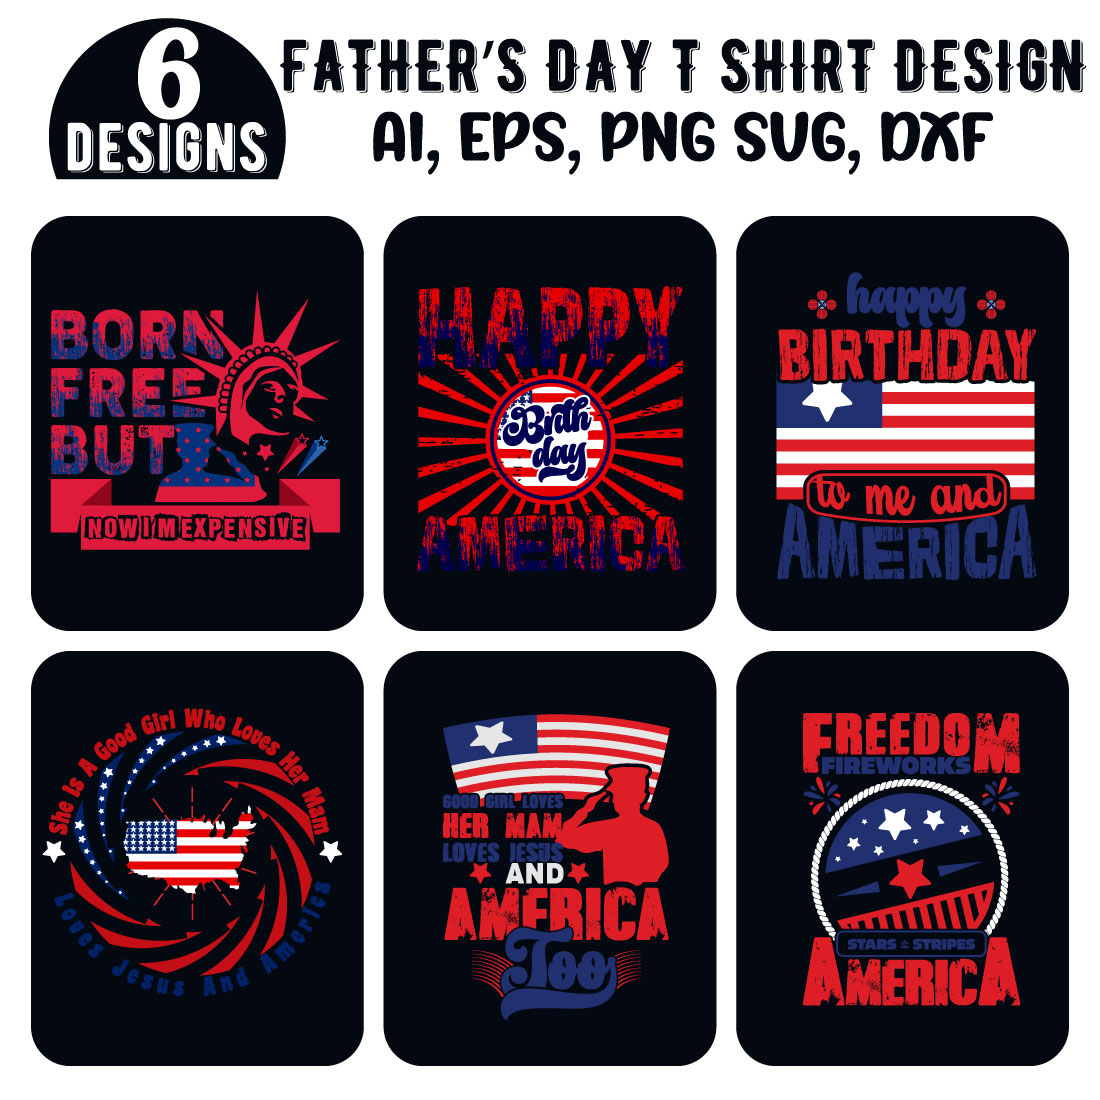 4th of July shirt, Happy 4th July, USA T-Shirt Design, Independence T-Shirt, 4th Of July T-Shirt Design, 4Th July America Independence Day Vector T-shirt cover image.